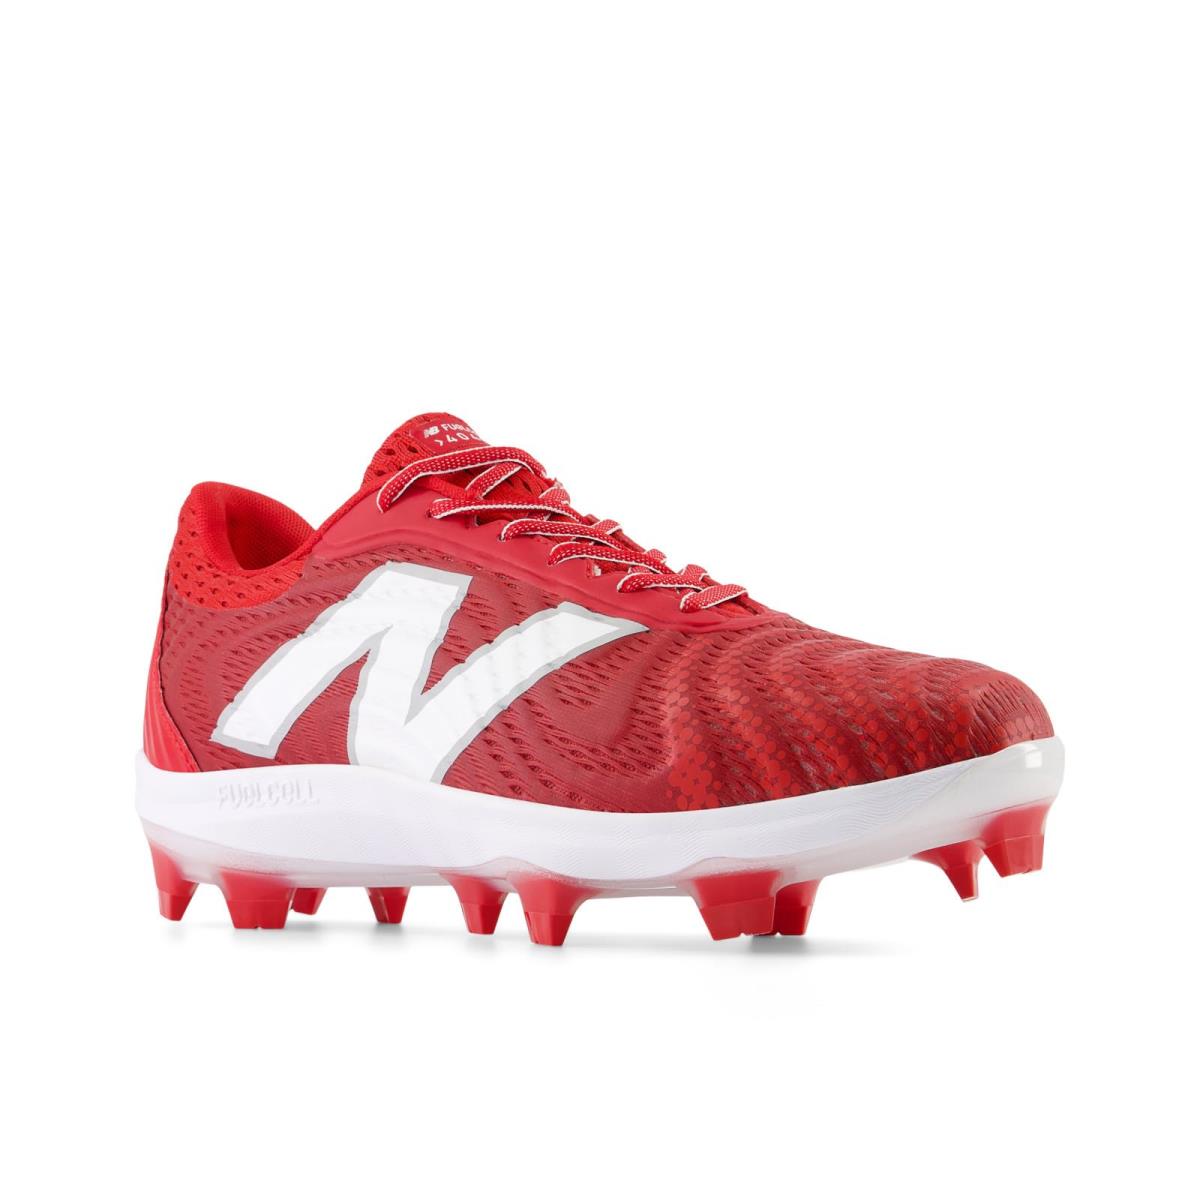 Man`s Sneakers Athletic Shoes New Balance Fuelcell 4040v7 Molded Team Red/Optic White